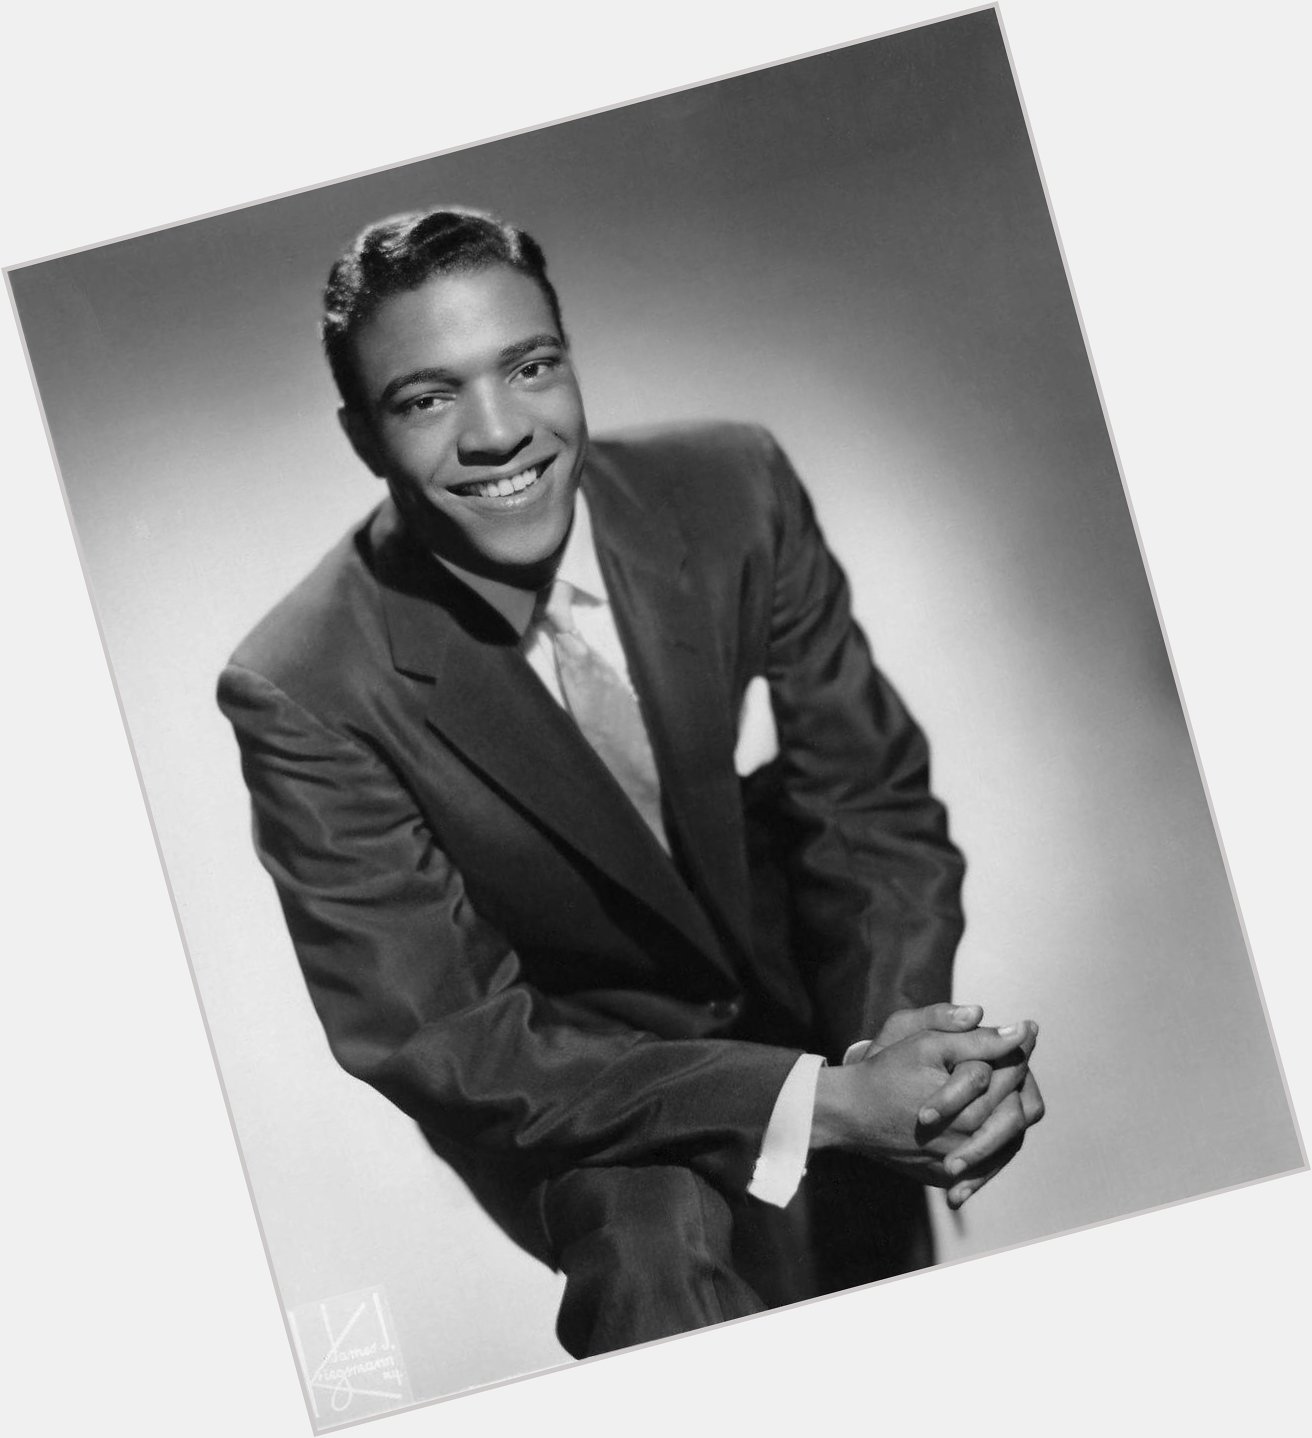 Happy Birthday to Clyde McPhatter, who would have turned 82 today! 